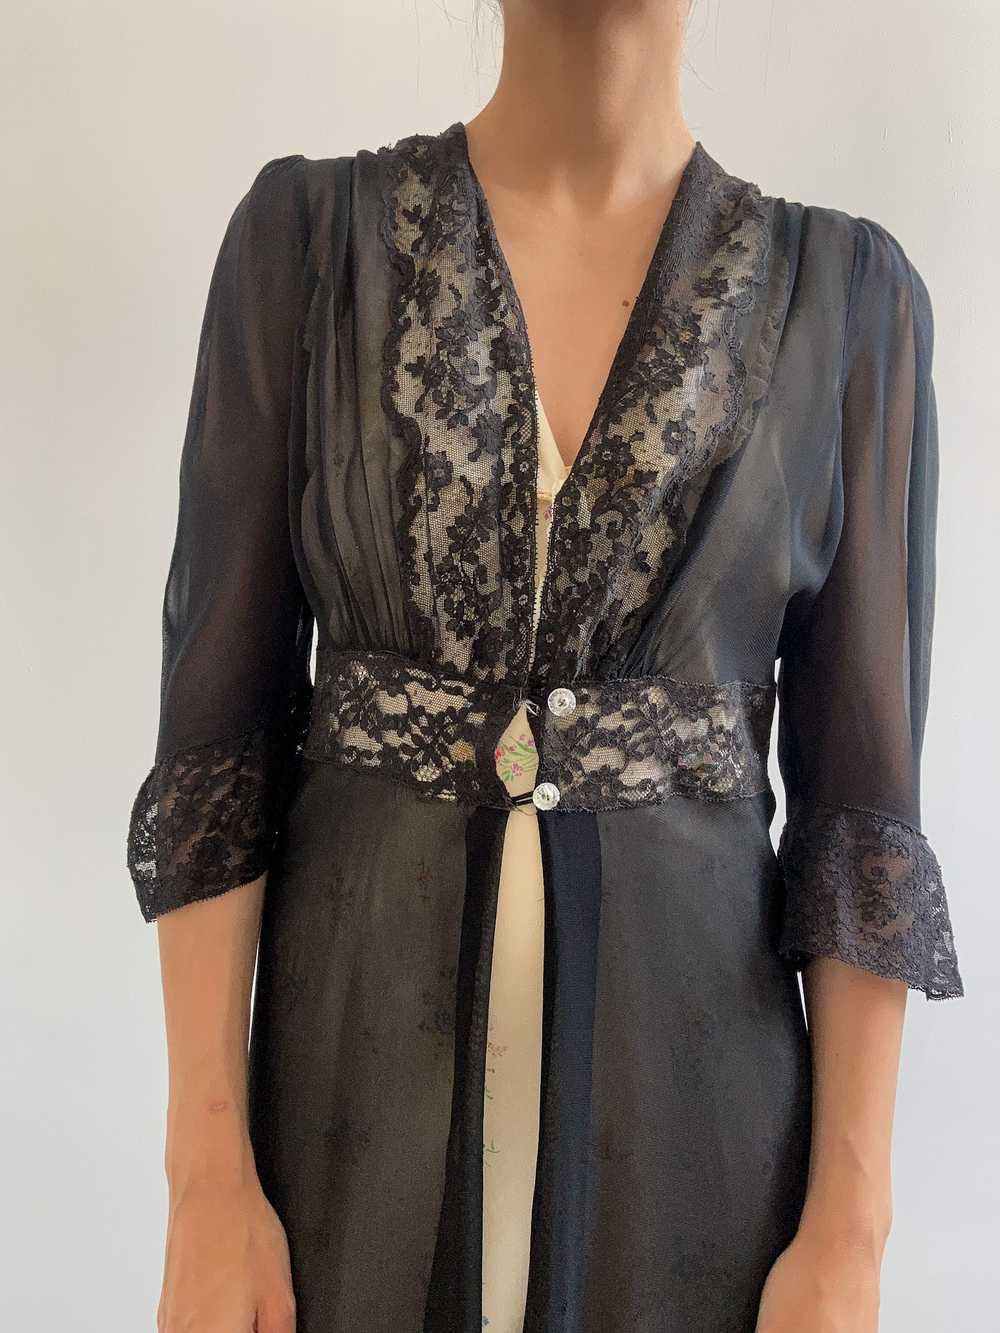 1930s Black Chiffon Robe with Floral Lace - Gorge… - image 5